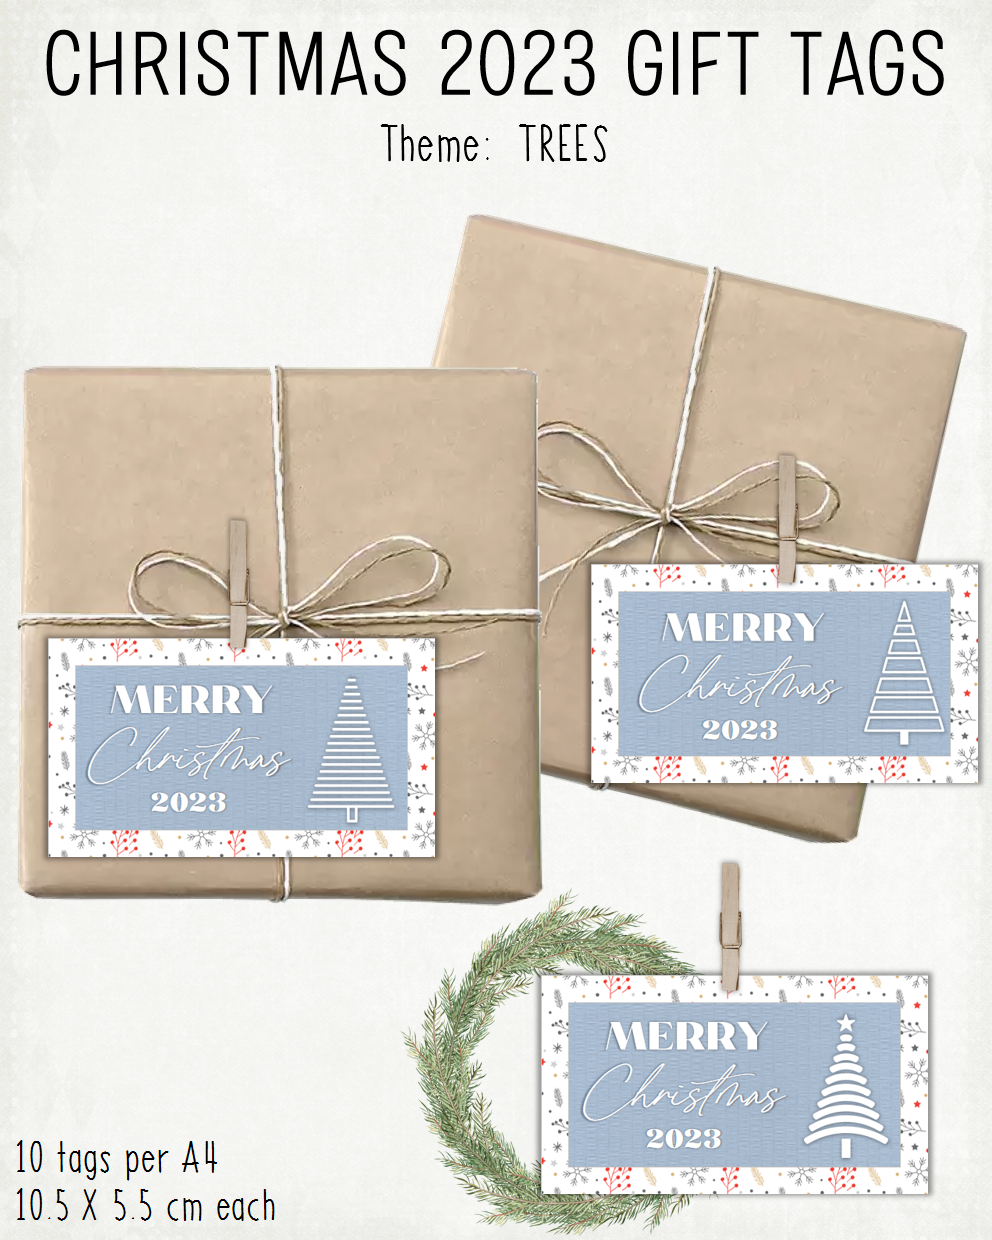 READY TO PRINT:  Christmas 2023 Gift Tags (set of 10) - Trees